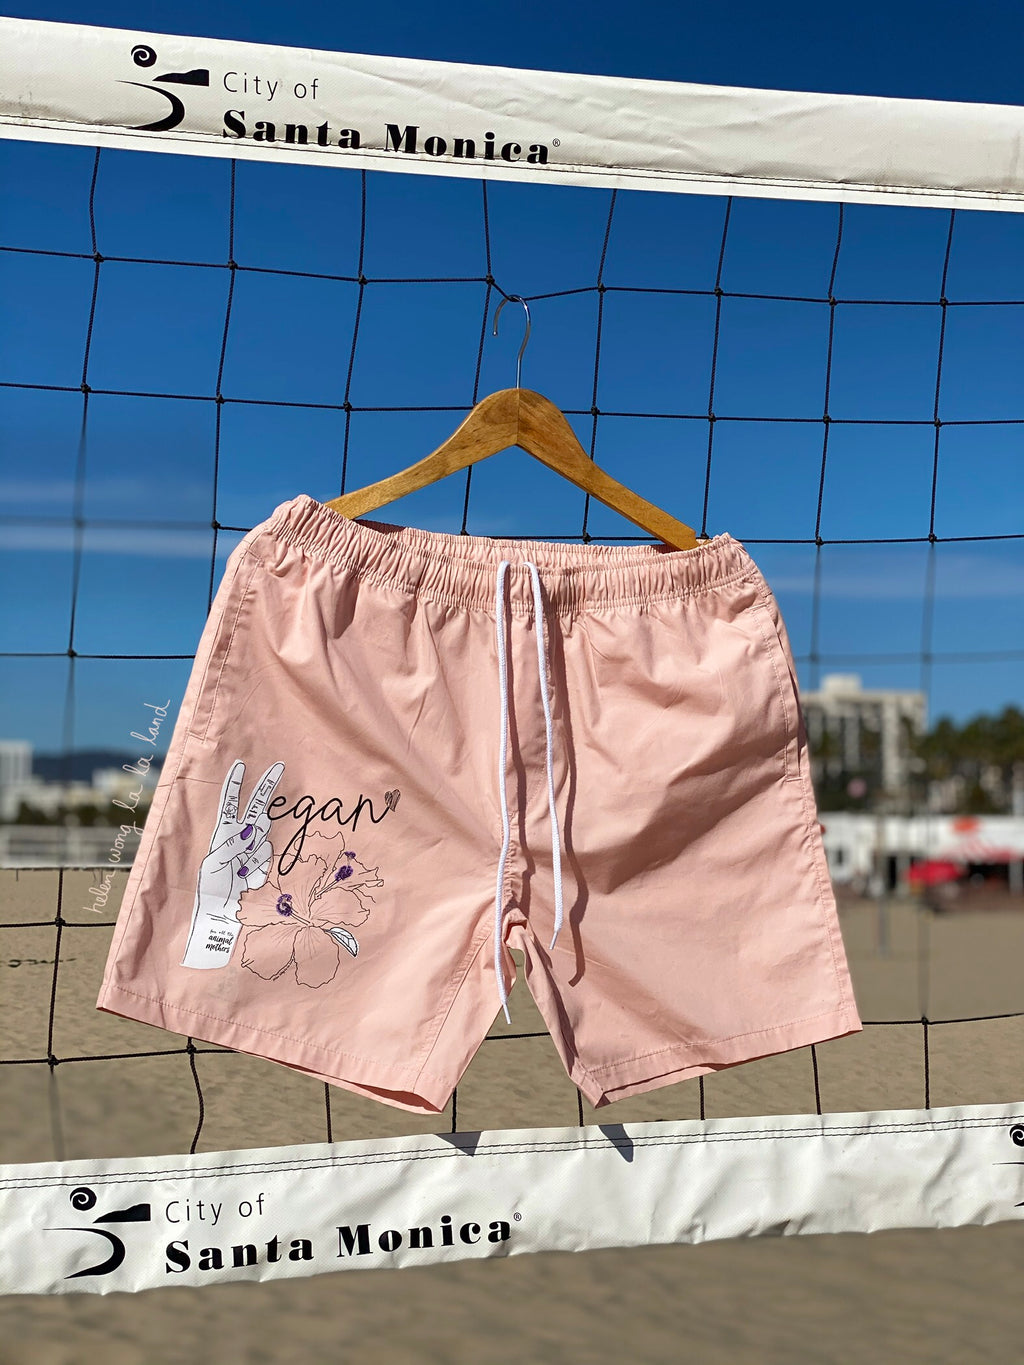 (S/S 2020) ✌🏼Vegan Hawaii beach shorts in PALE CORAL PINK